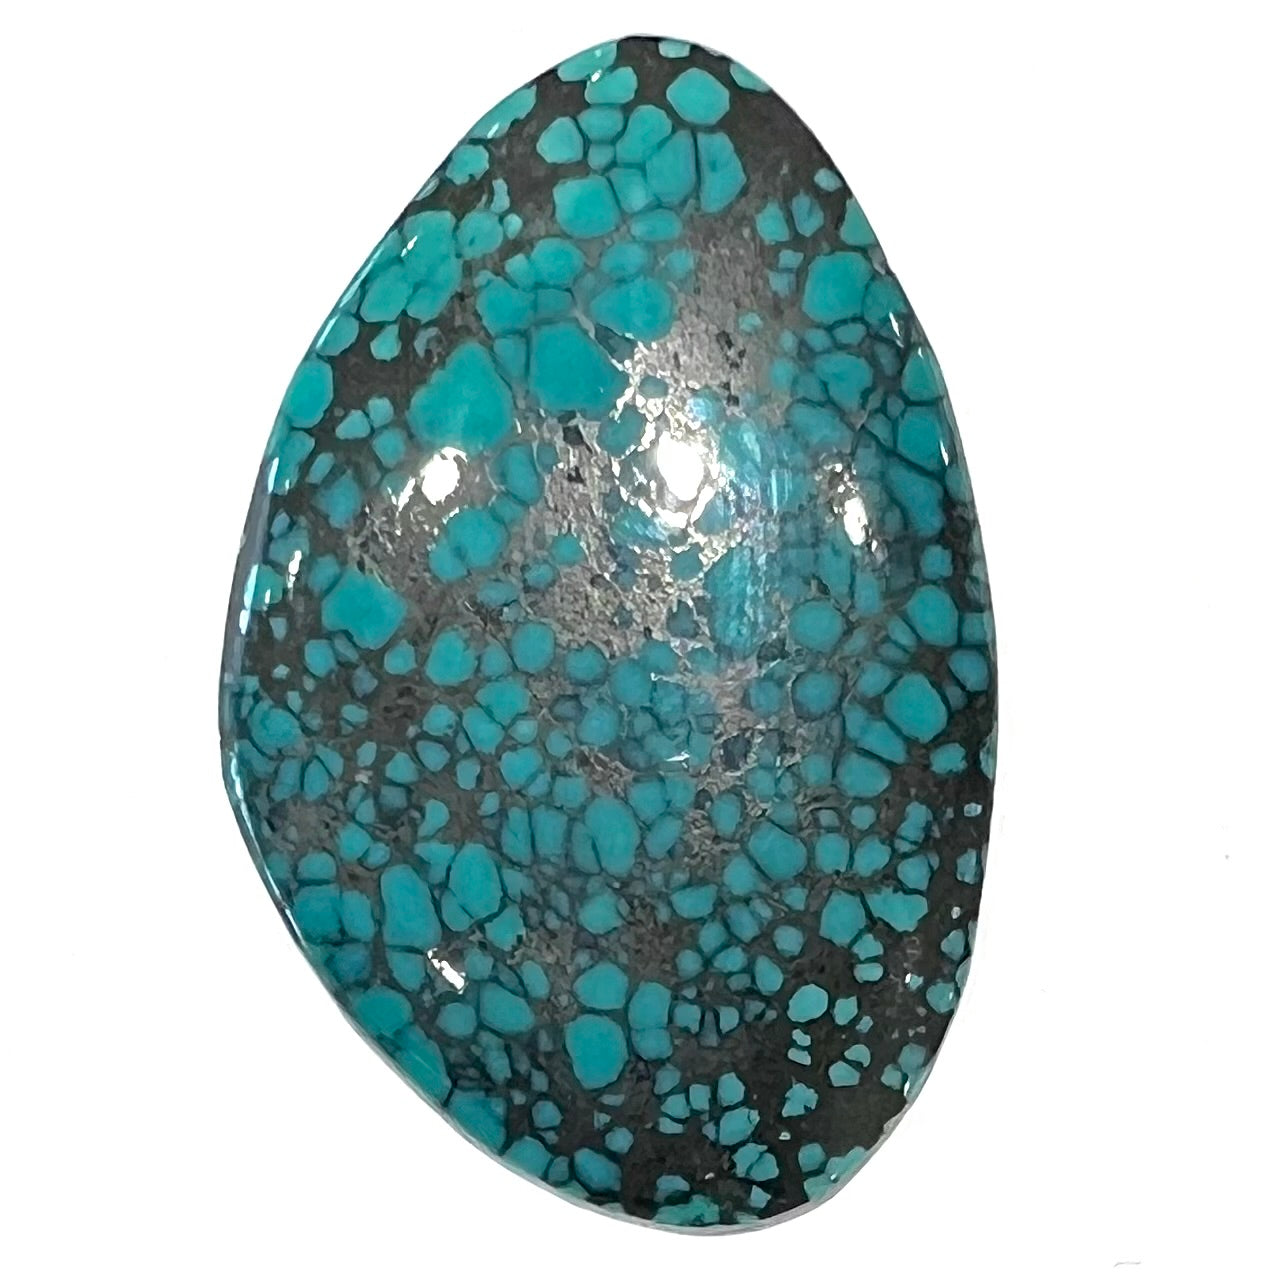 A polished, freeform shaped spiderweb turquoise cabochon from Lone Mountain Mine in Esmeralda County, Nevada.